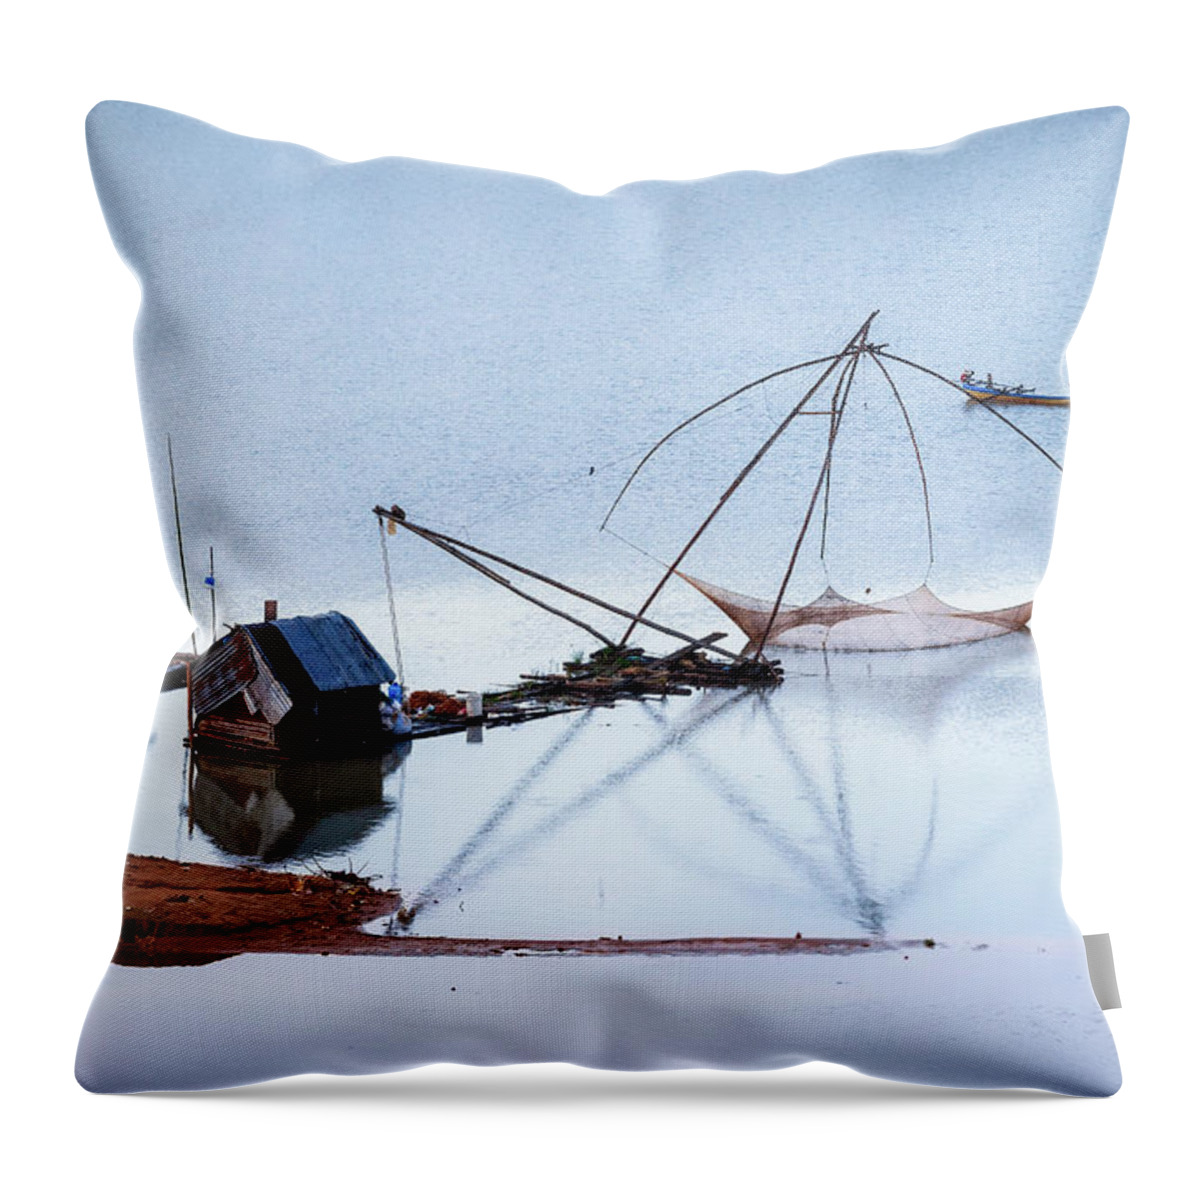 Awesome Throw Pillow featuring the photograph Twilight by Khanh Bui Phu